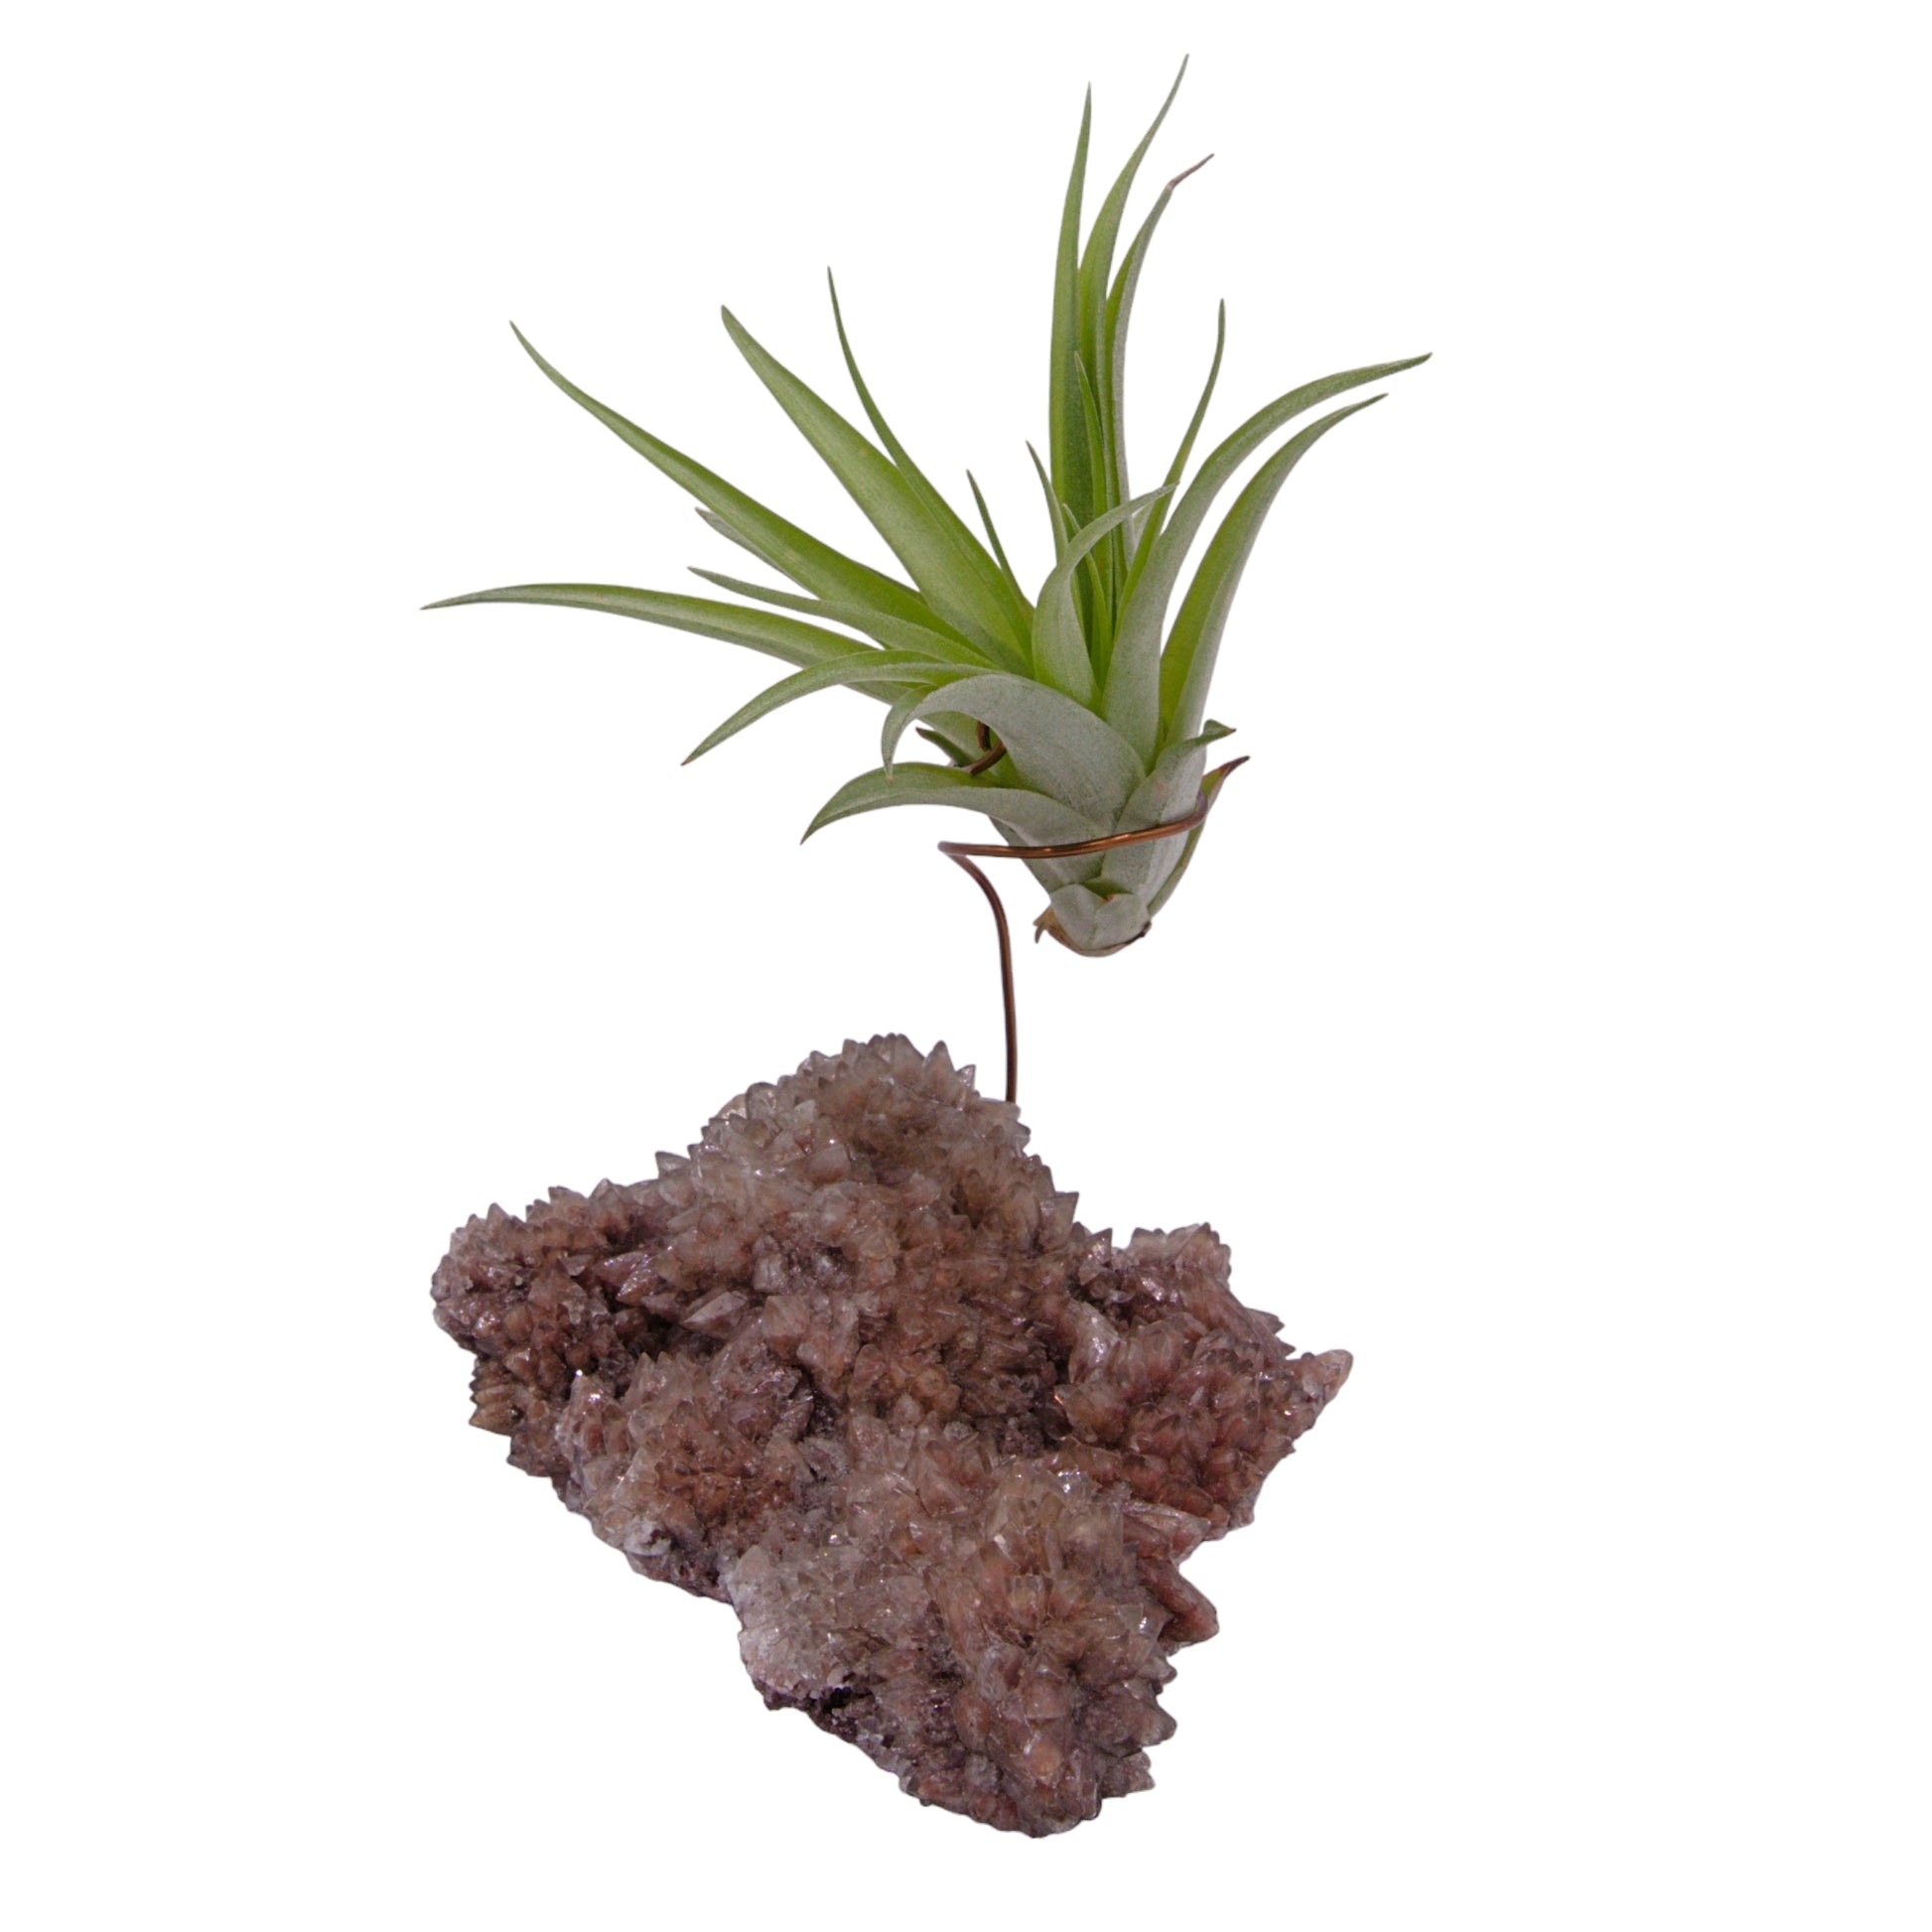 Dogtooth calcite crystal airplant holder